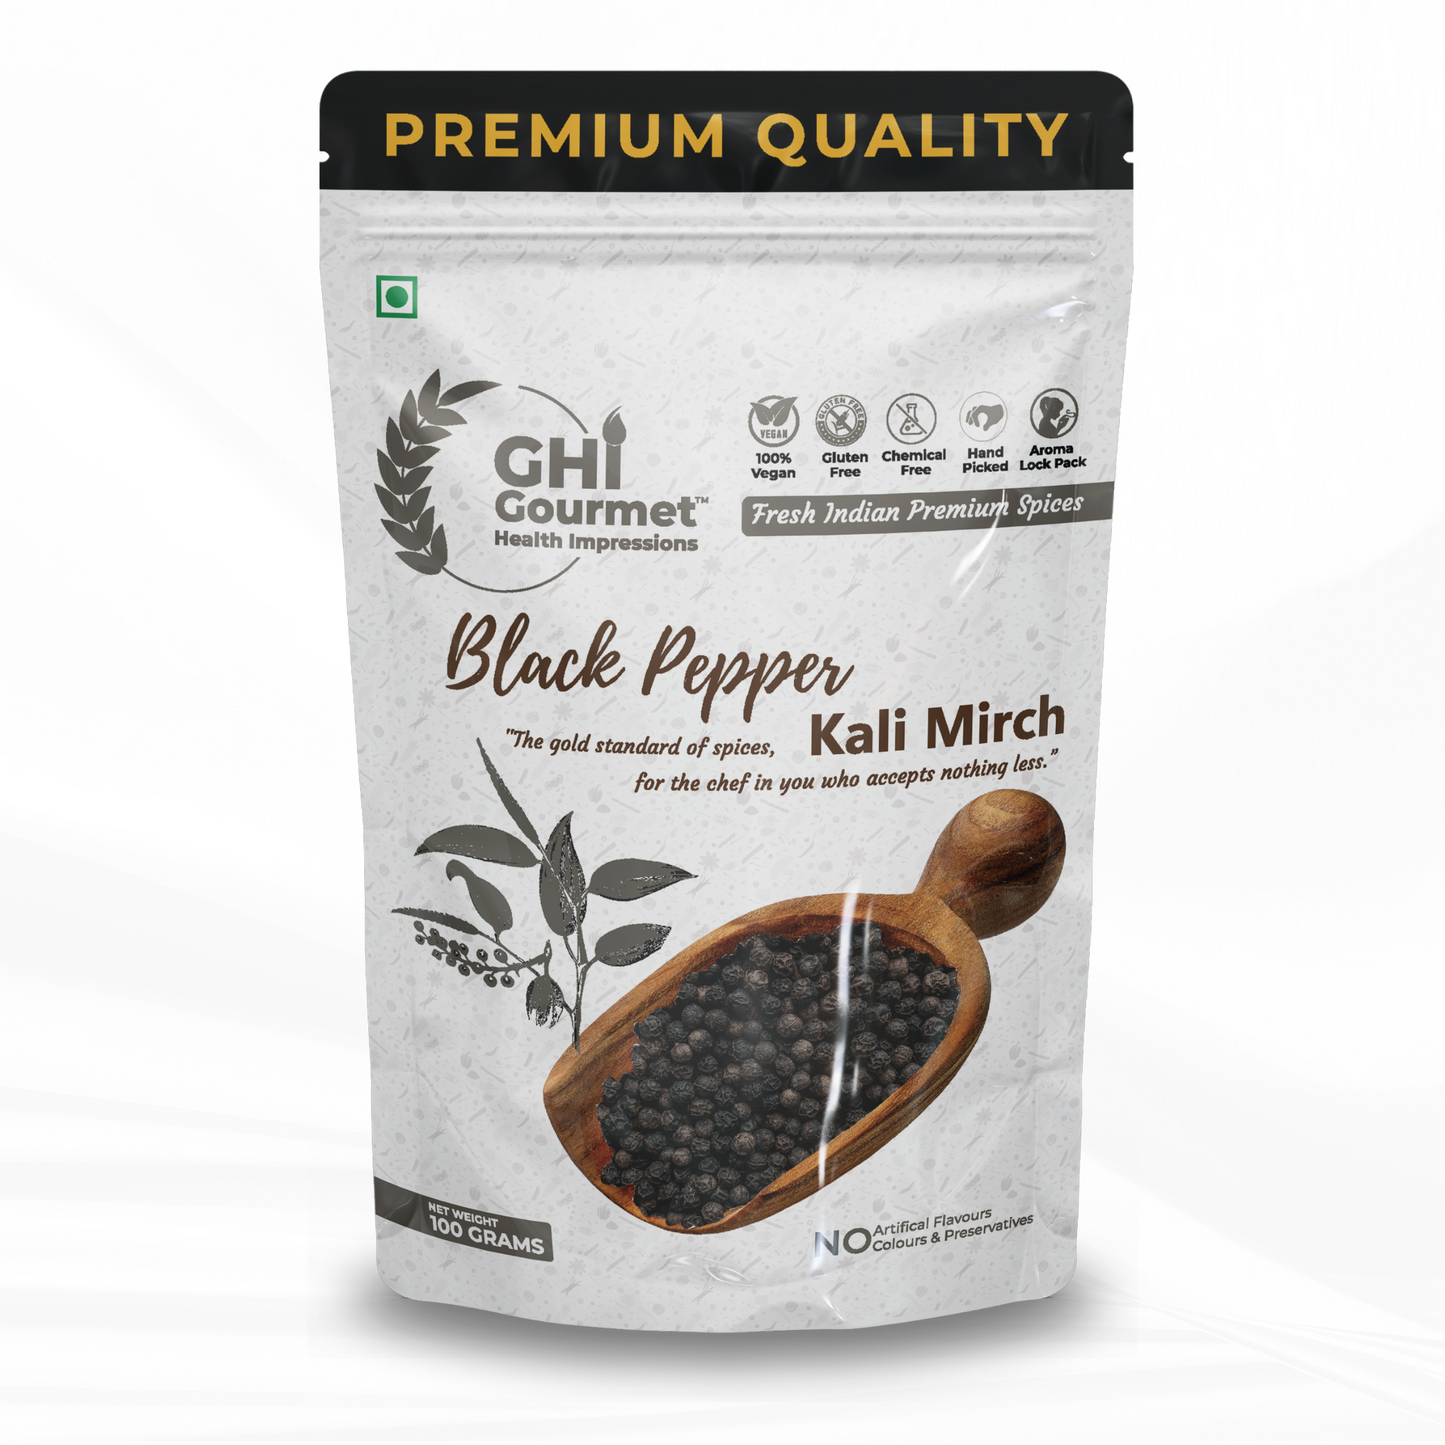 Spice Combo Pack with Black Pepper 100g, Green Cardamom 50g (8mm Large Size) and Whole Cloves 50g